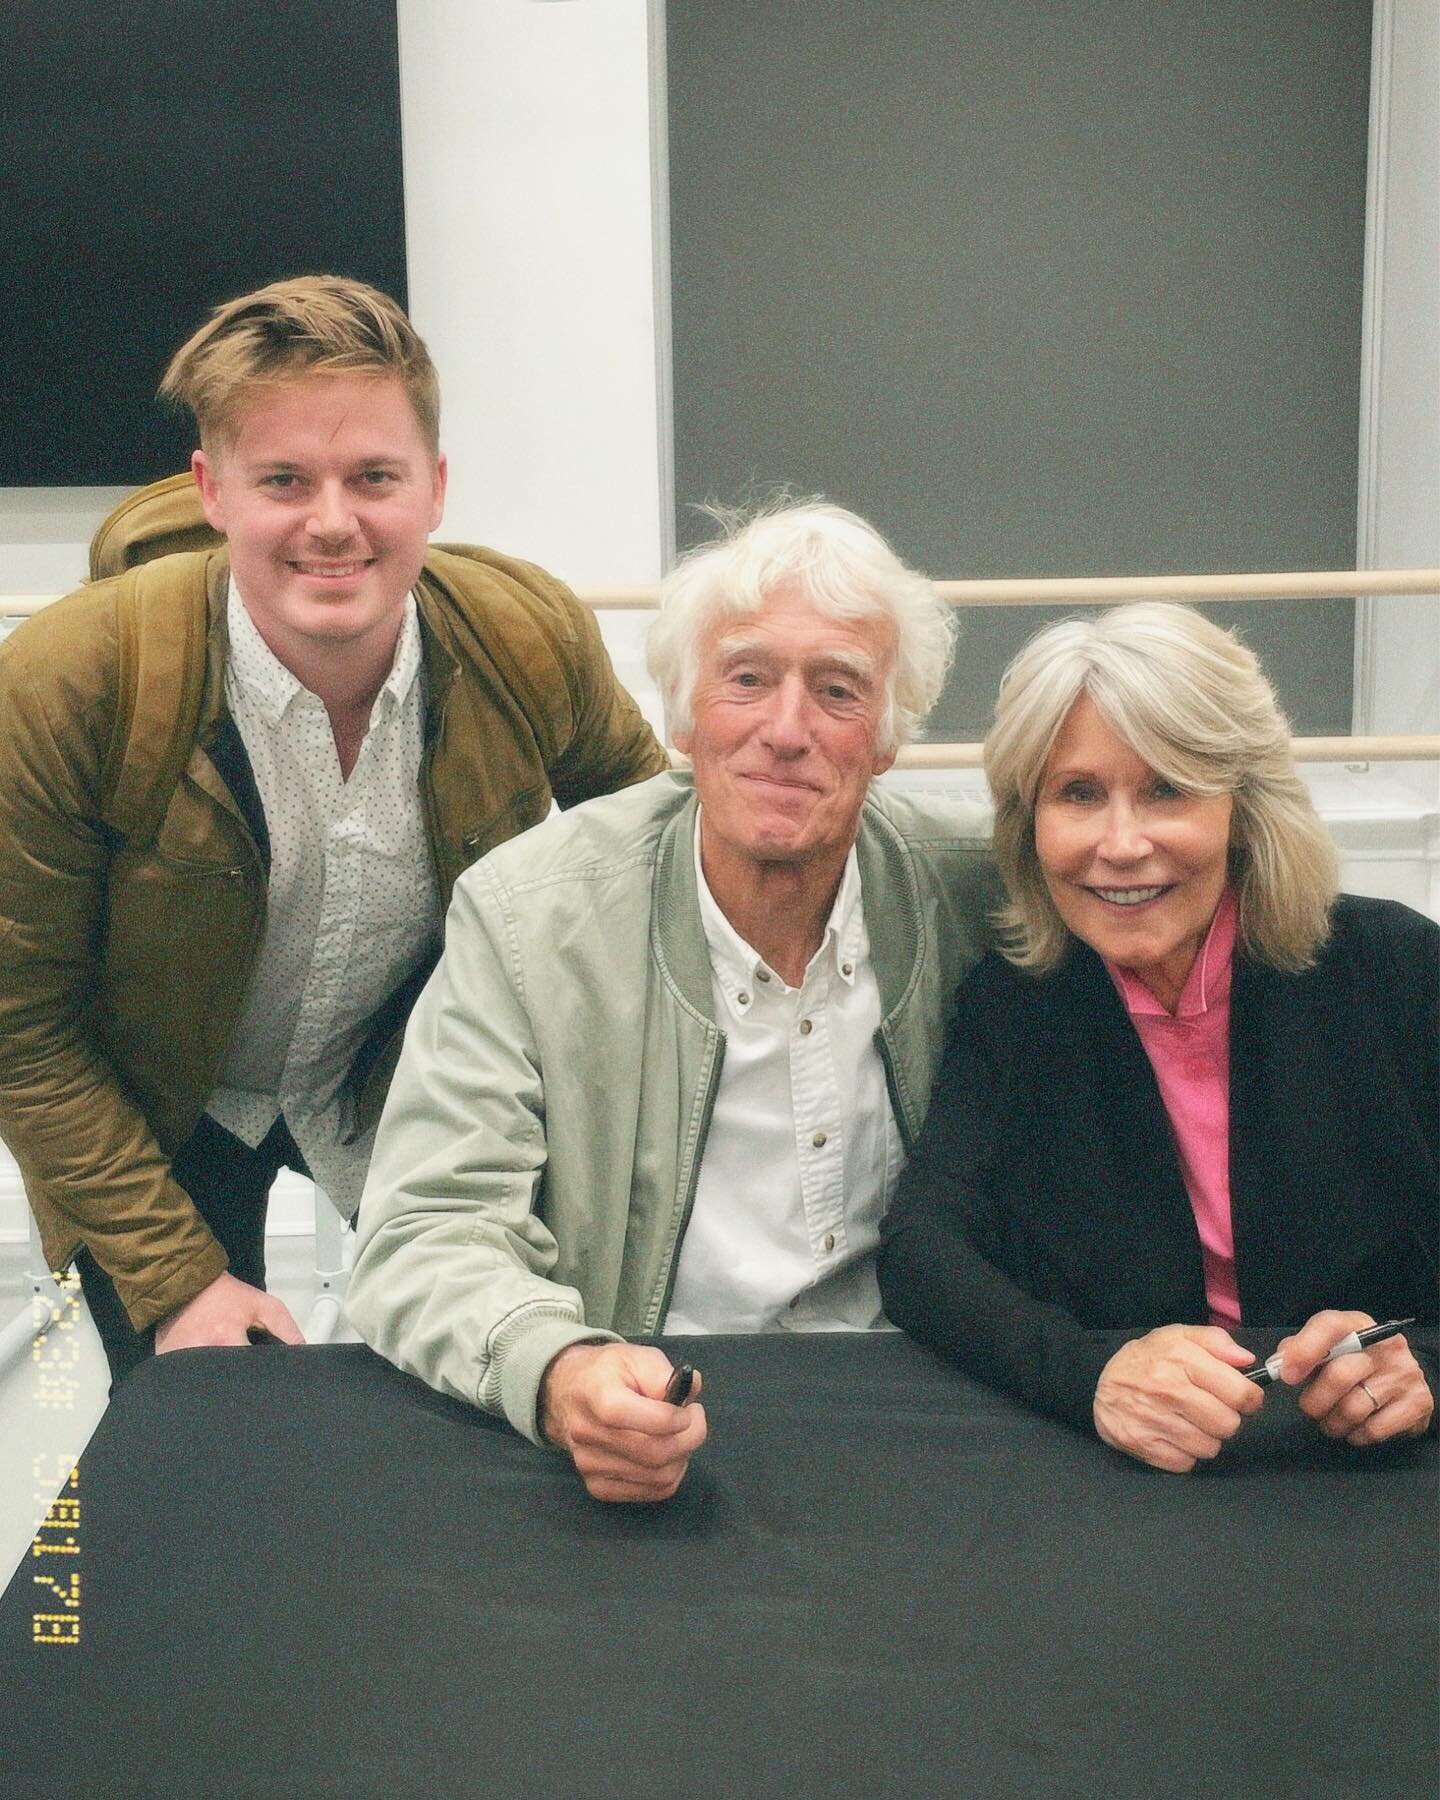 I feel mighty fortunate to have had the chance to chat with legendary English cinematographer Sir Roger Deakins while he was on his NYC book tour with his partner James @team.deakins 

During the moderated discussion on stage I asked Roger (from the 